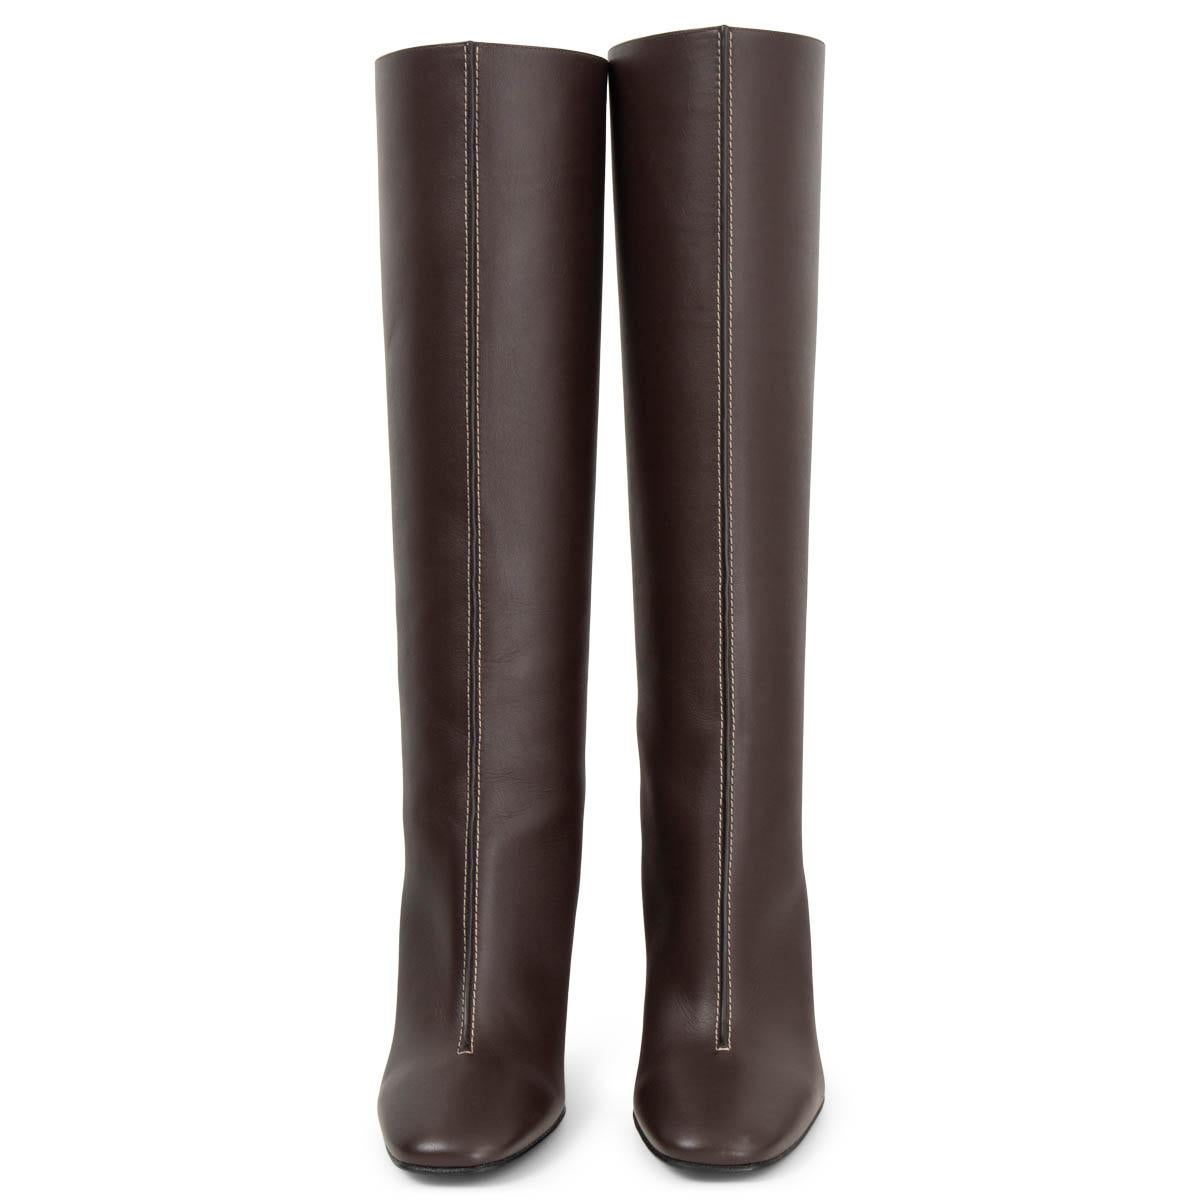 100% authentic Hermès Dressage boots in Marron Tourbe brown calfskin with tinted edges and contrasting topstitching. A saddle-stitch style for a timeless and elegant look. The design featurea Hazelnut goatskin insole and lining. Brand new. Rubber